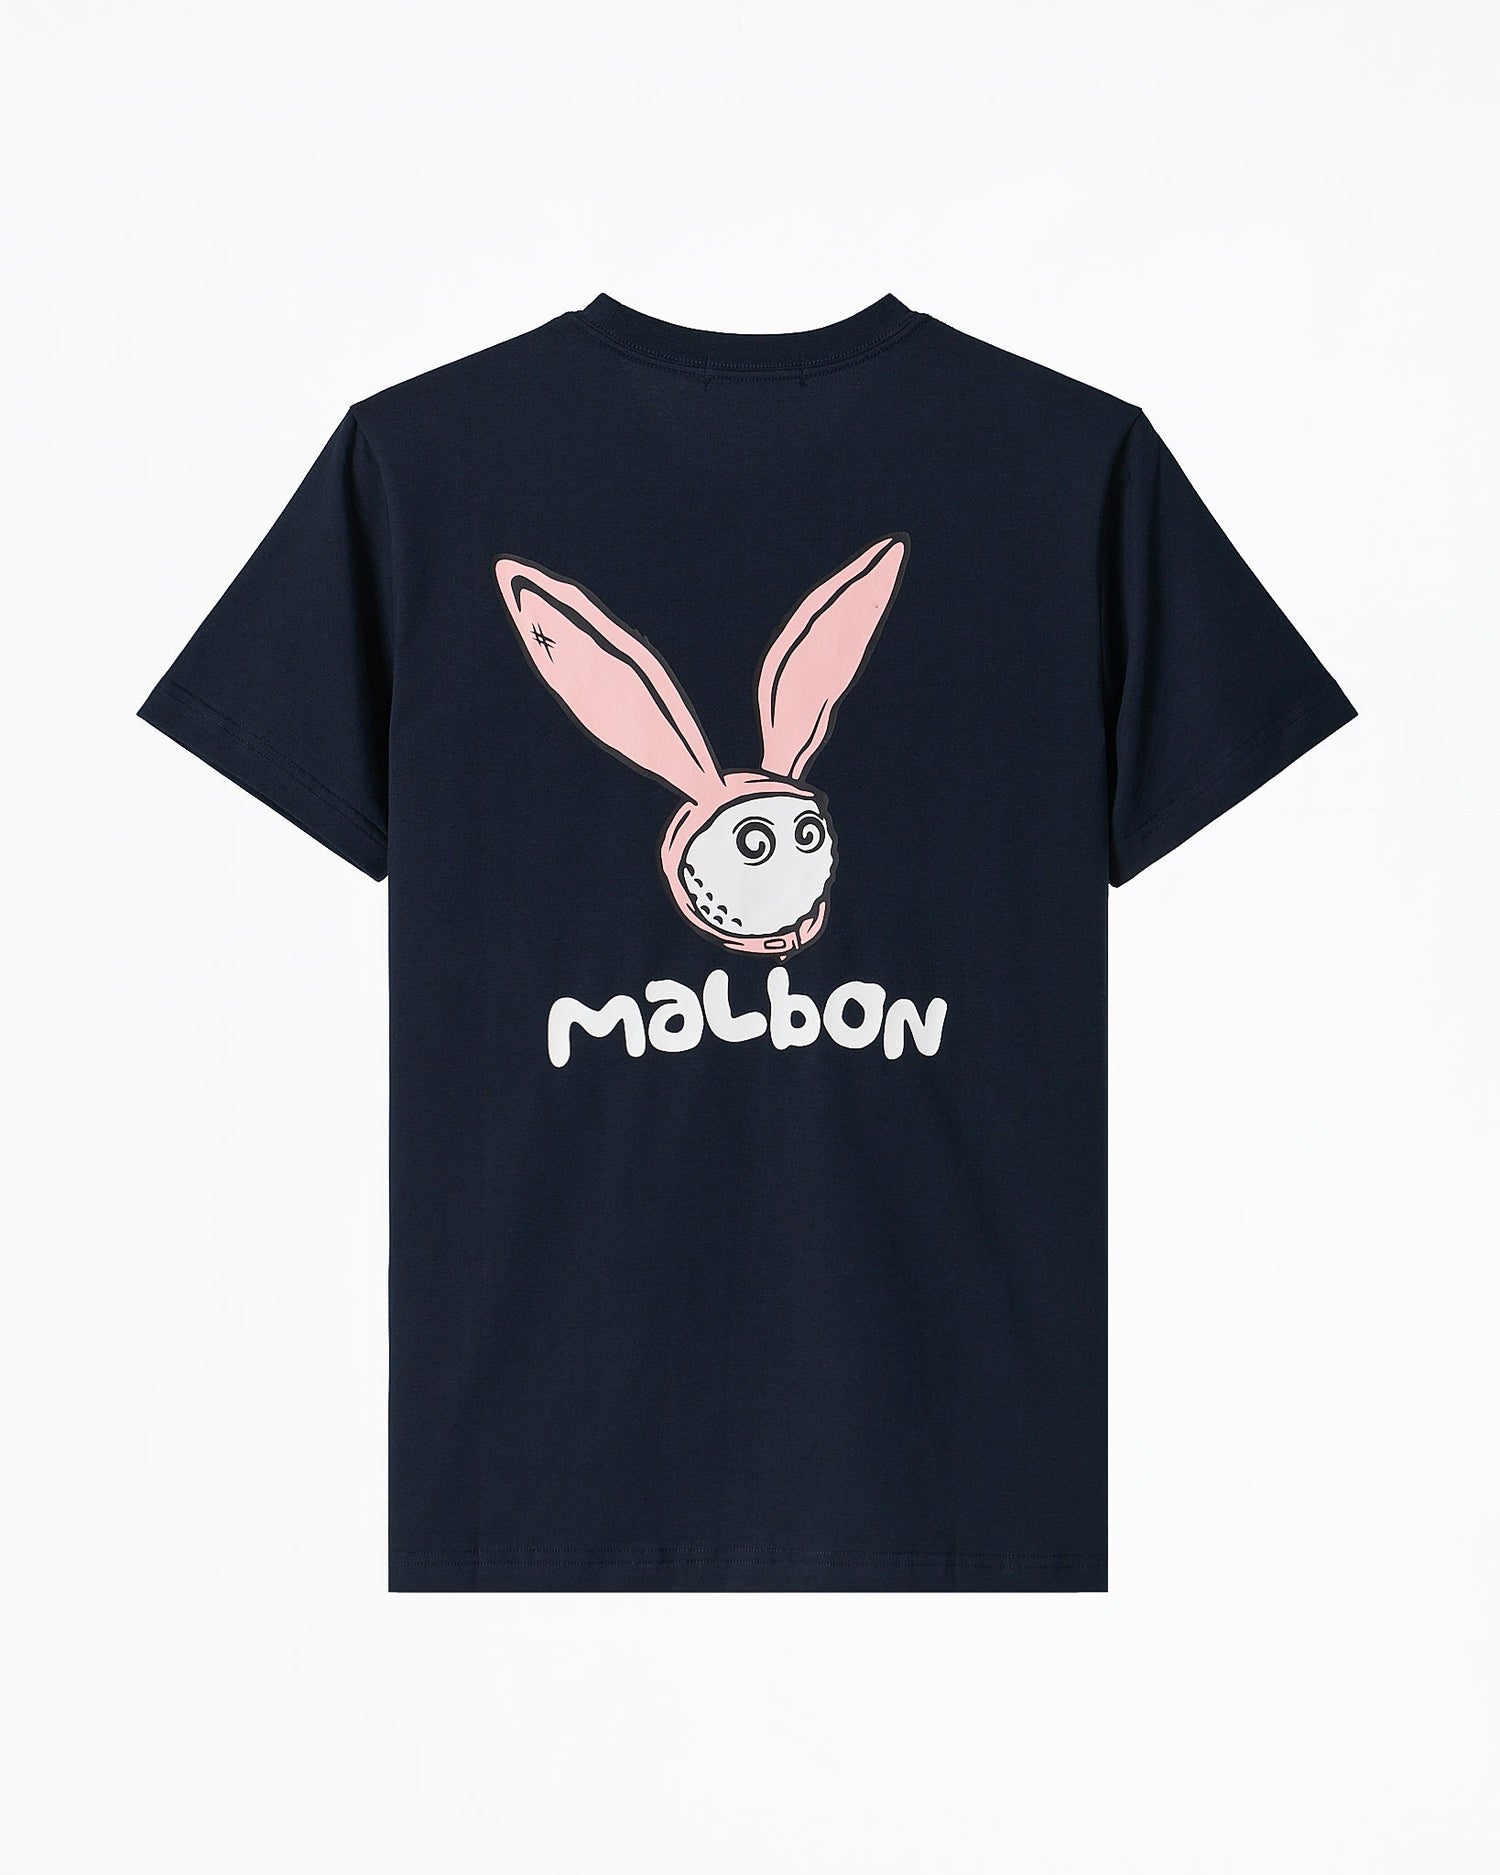 MOI OUTFIT-MAL Bunny Back Printed Unisex Blue T-Shirt 17.90